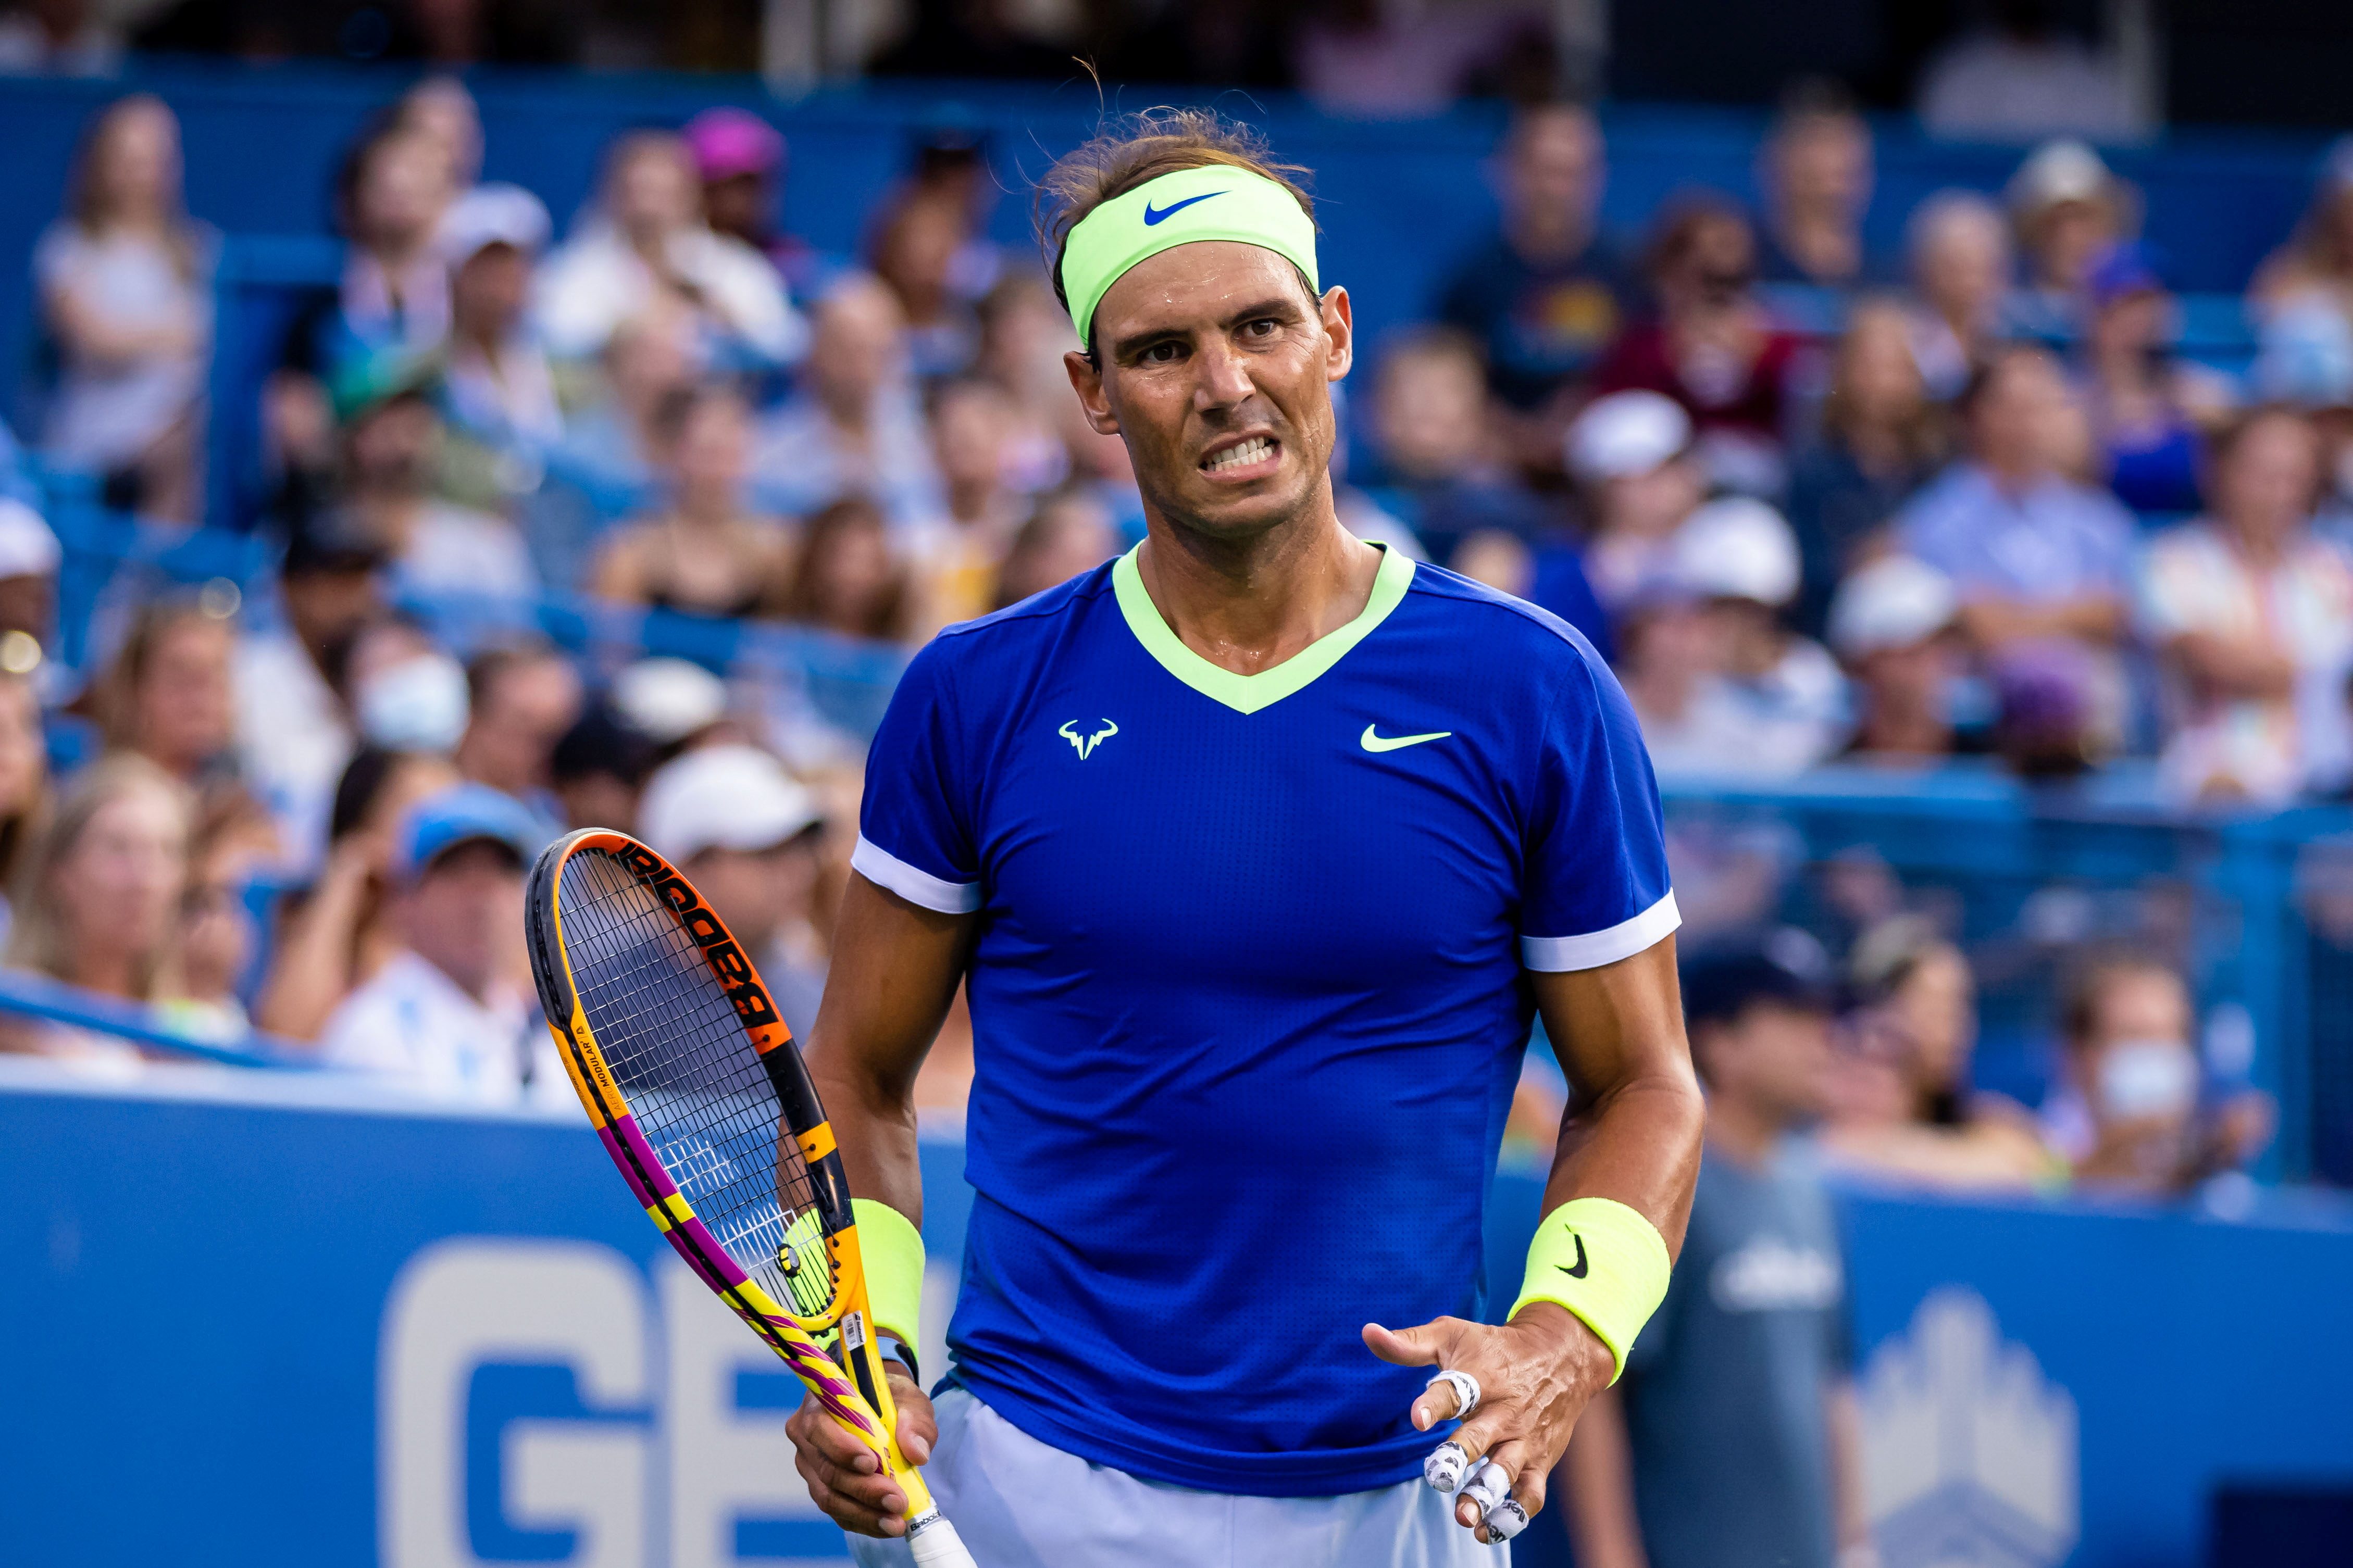 Nadal ends 2021 season prematurely over niggling foot issue